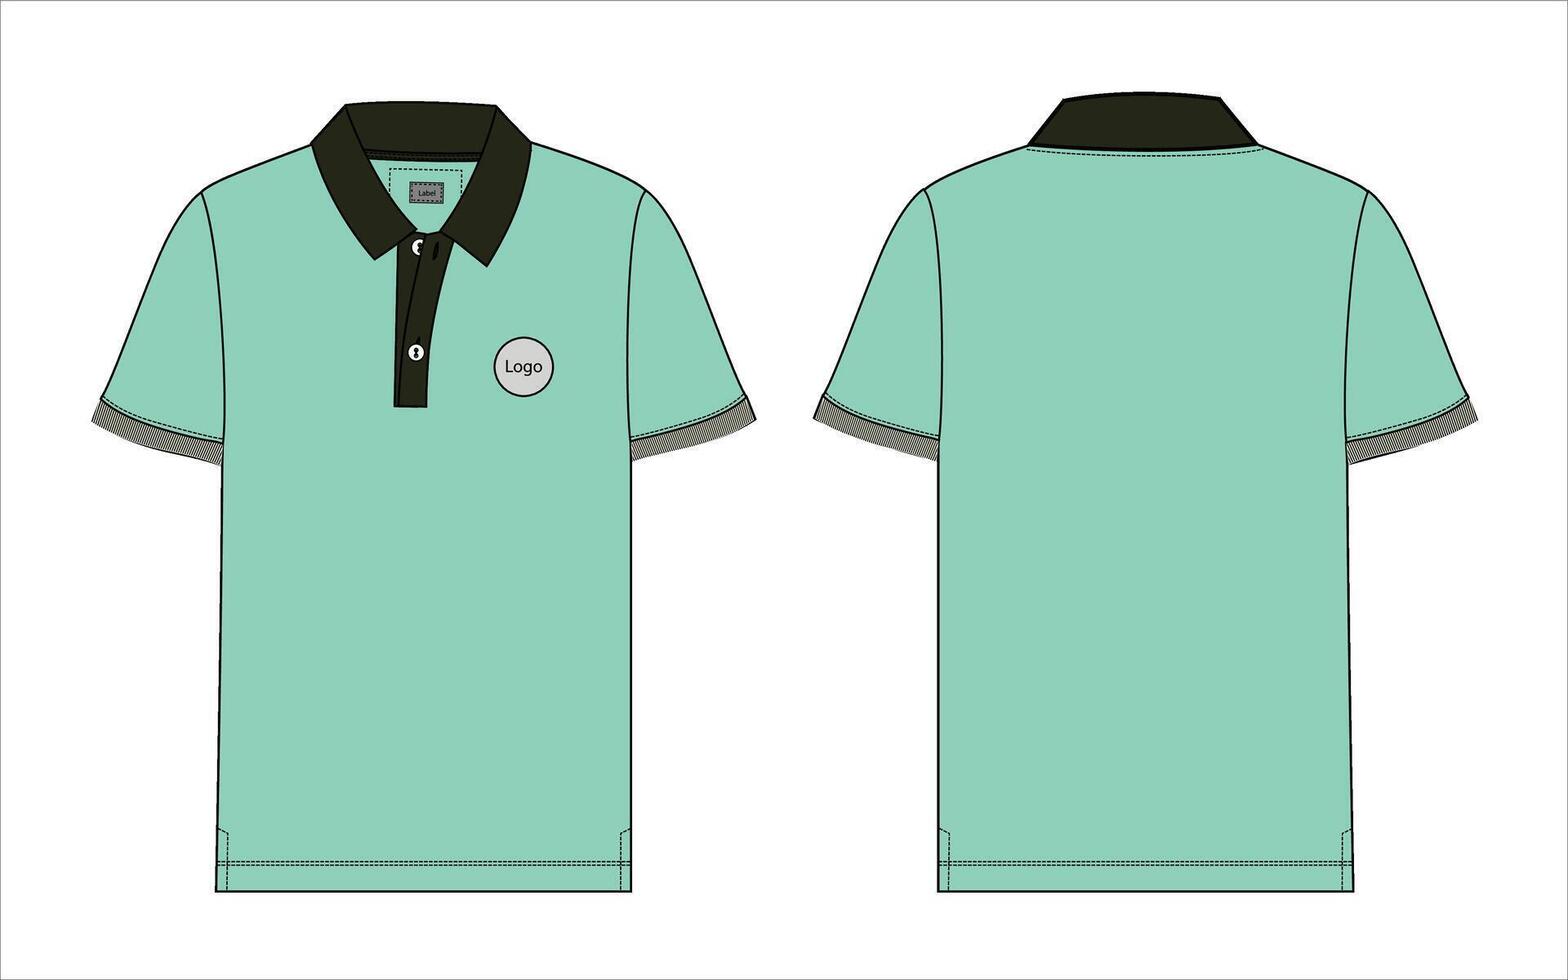 hort sleeve polo shirt vector illustration template front and back views